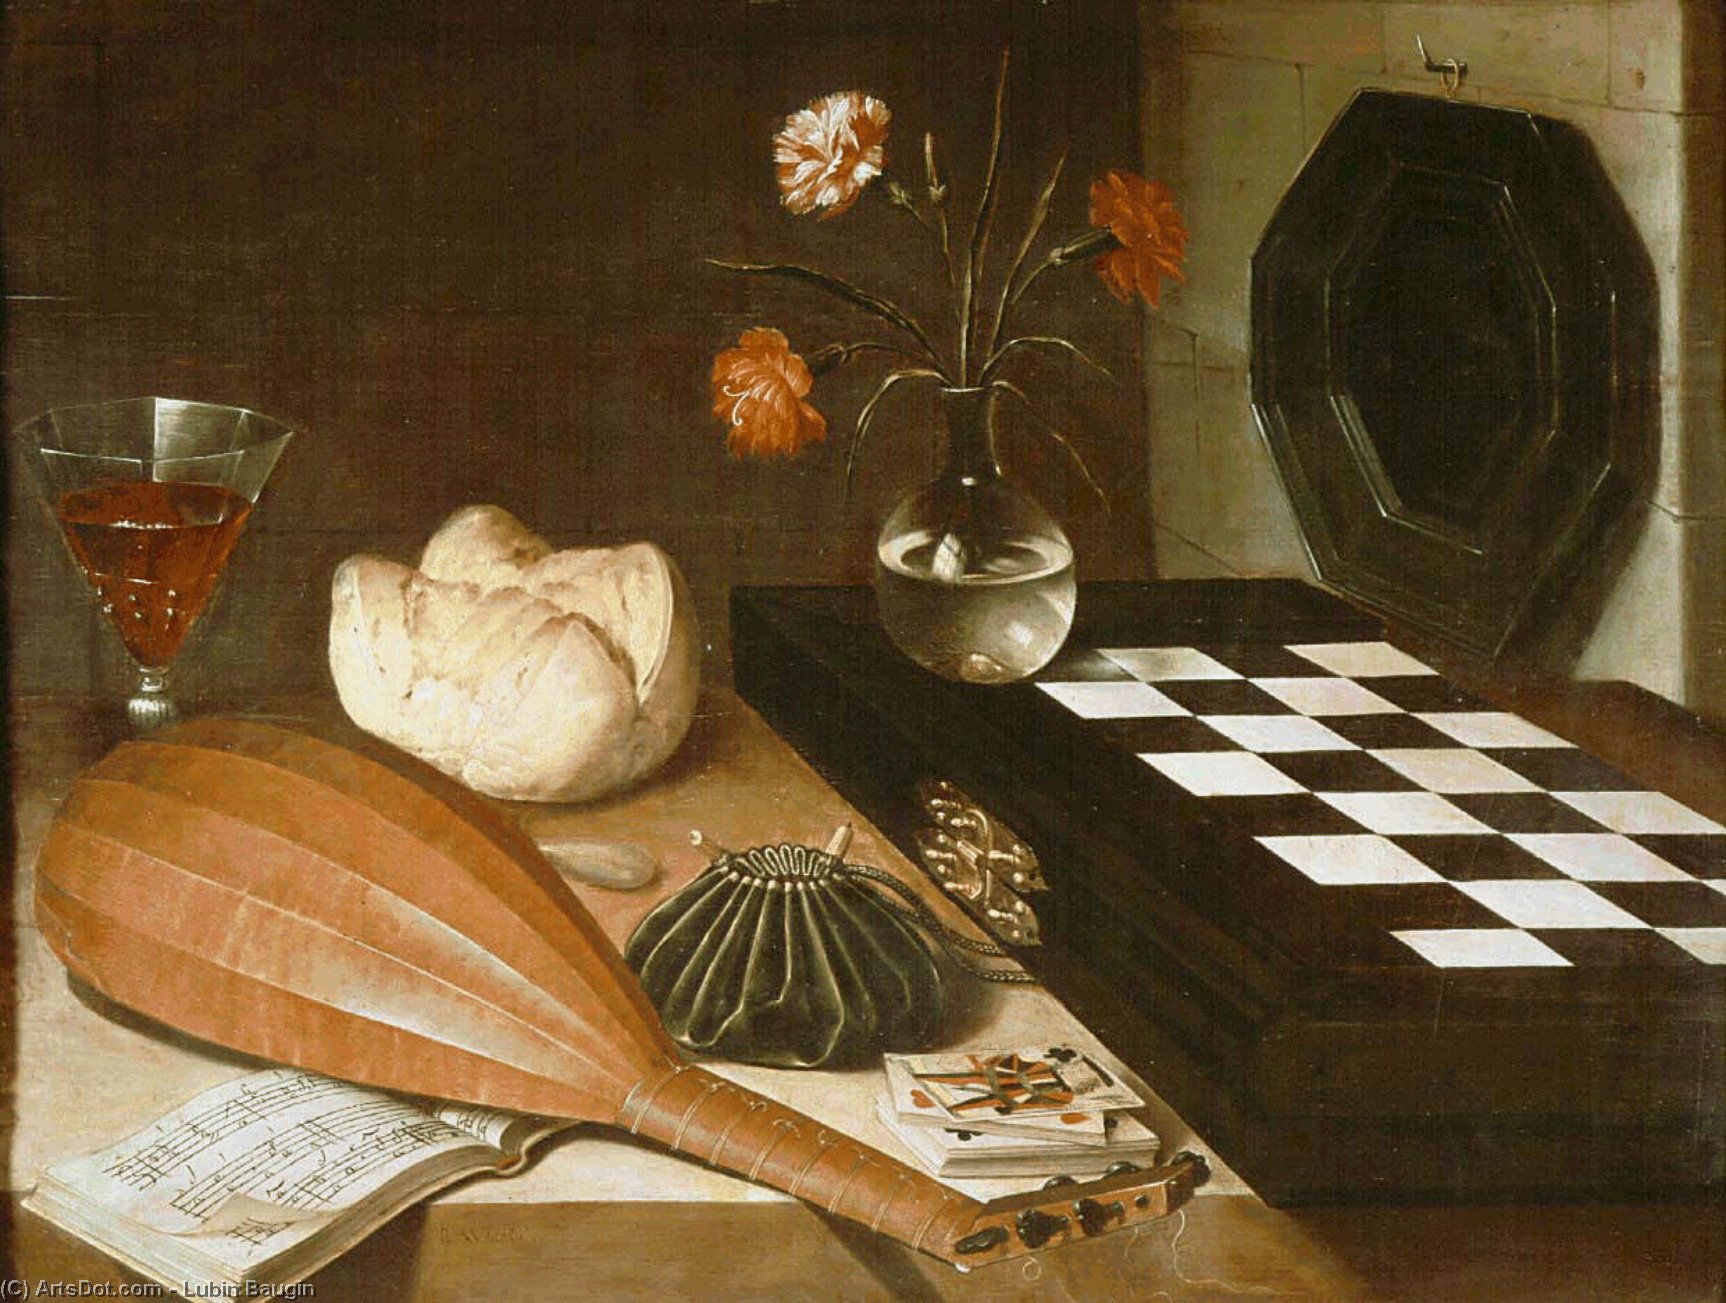 Order Paintings Reproductions Still life with chessboard, c.1630, Louvre by Lubin Baugin (1612-1663, France) | ArtsDot.com